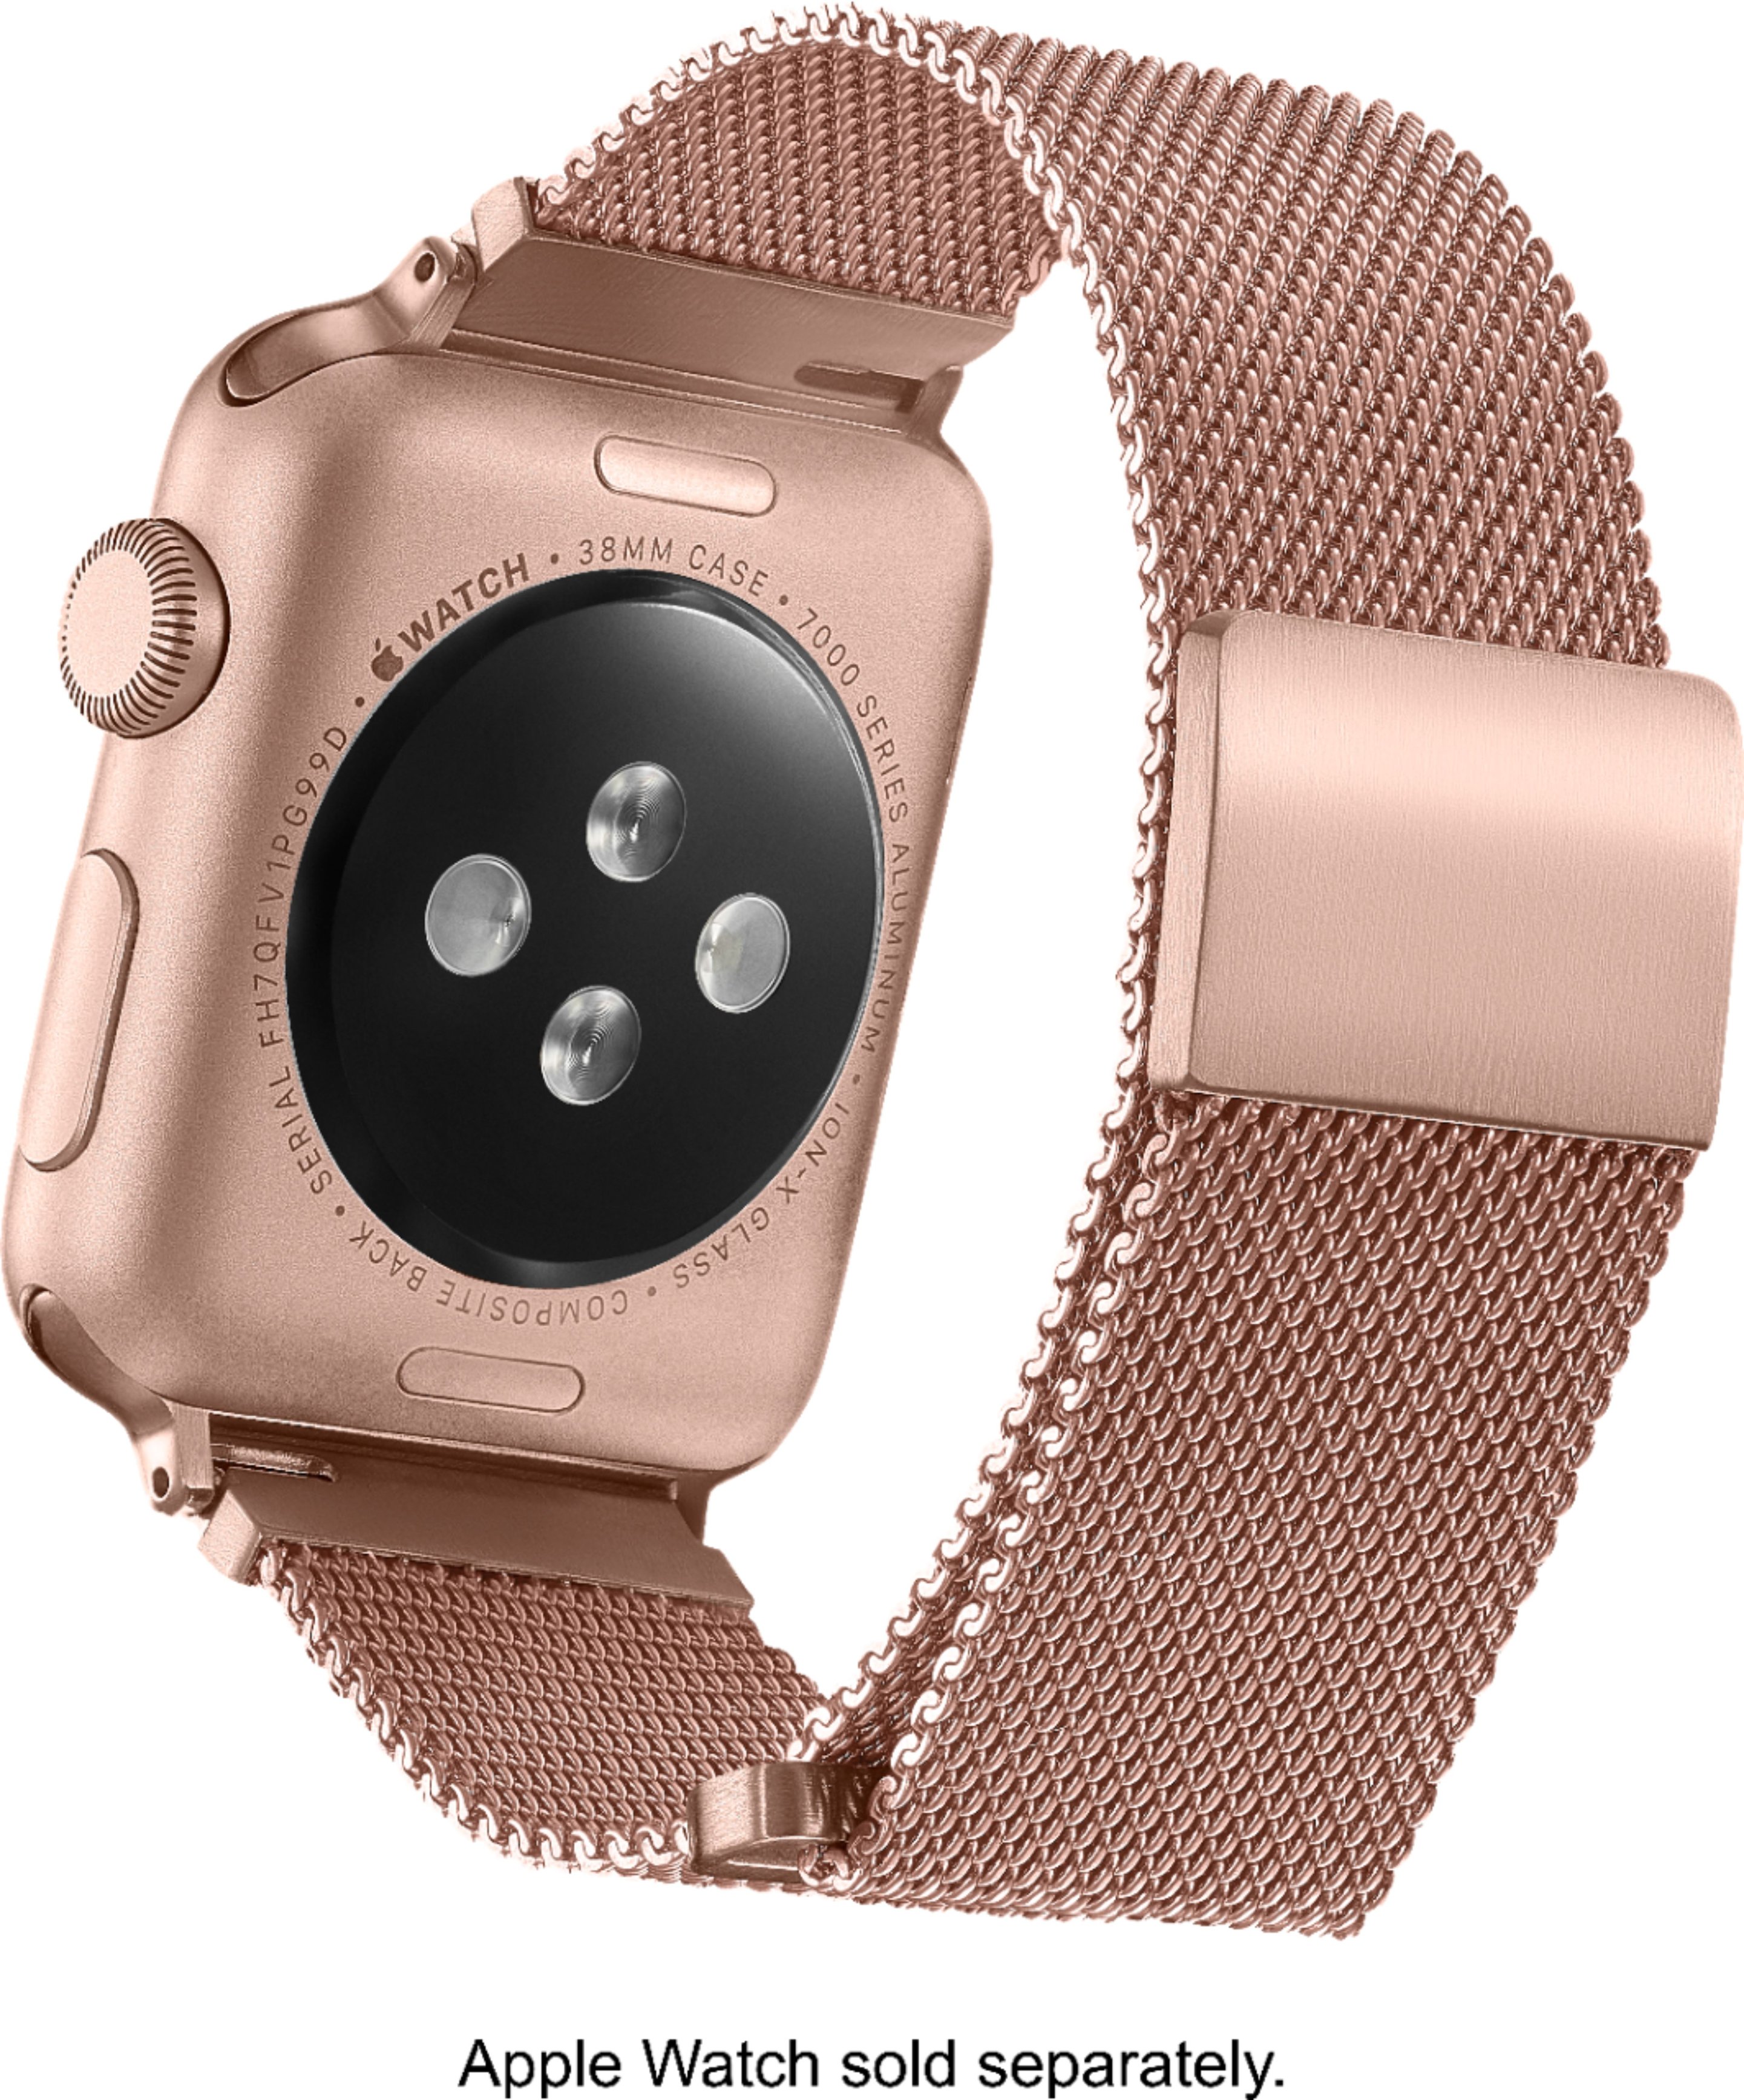 Platinum Magnetic Stainless Steel Mesh Band For Apple Watch 38mm And 40mm Gold Pt Awb38gmb3 Best Buy